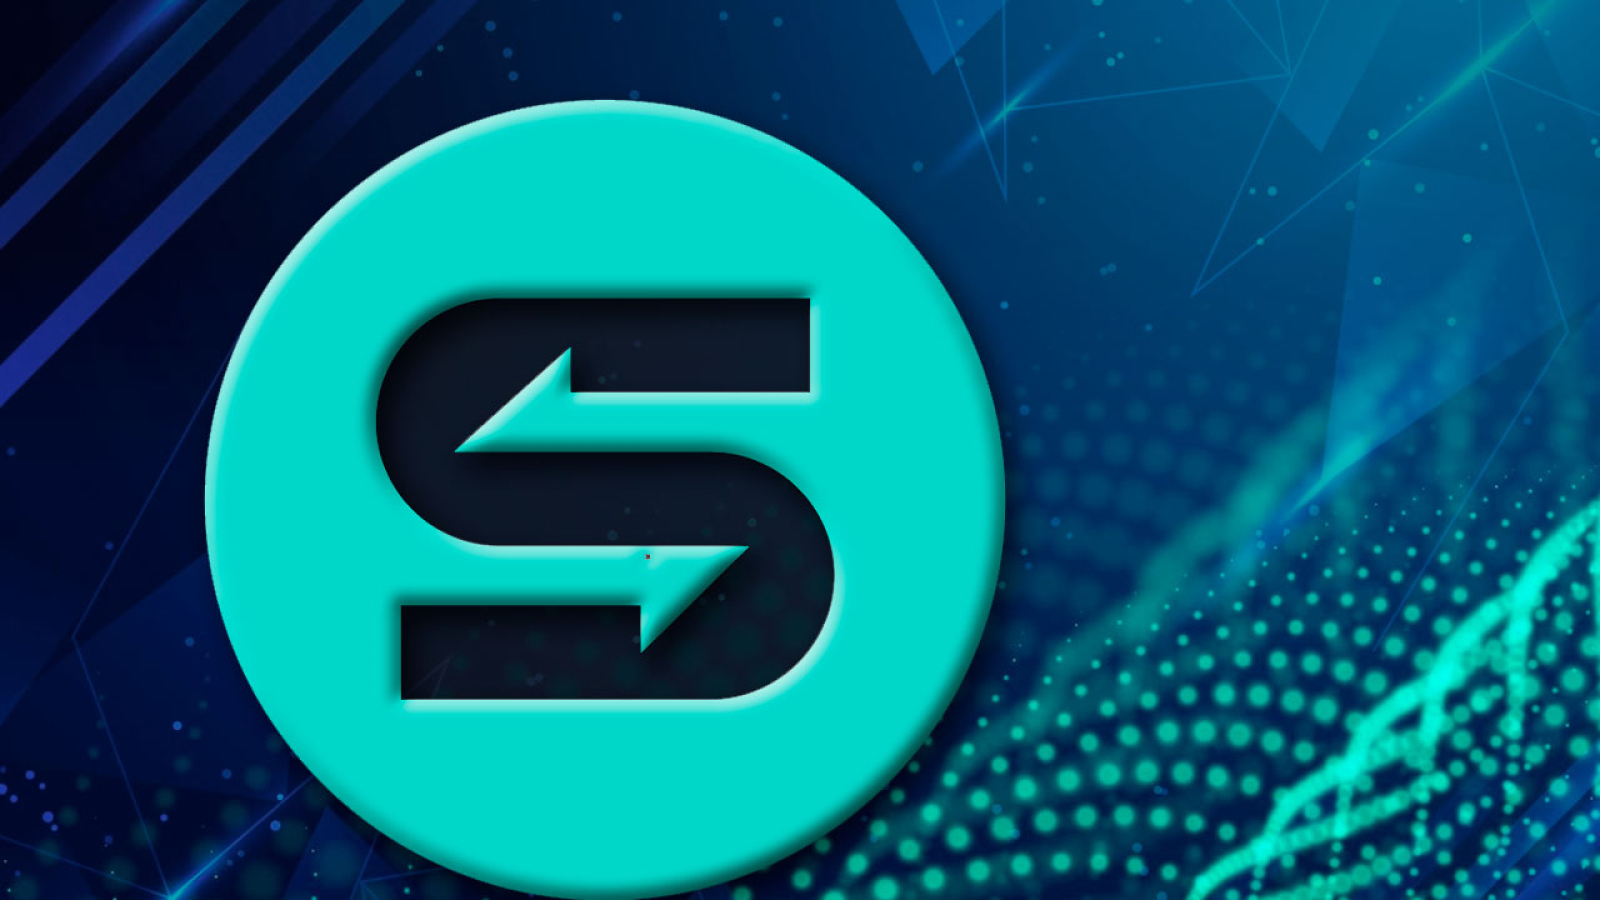 SOLID P2P Trading Platform Upgrades Interface and Functionality, Launches Referral Campaign